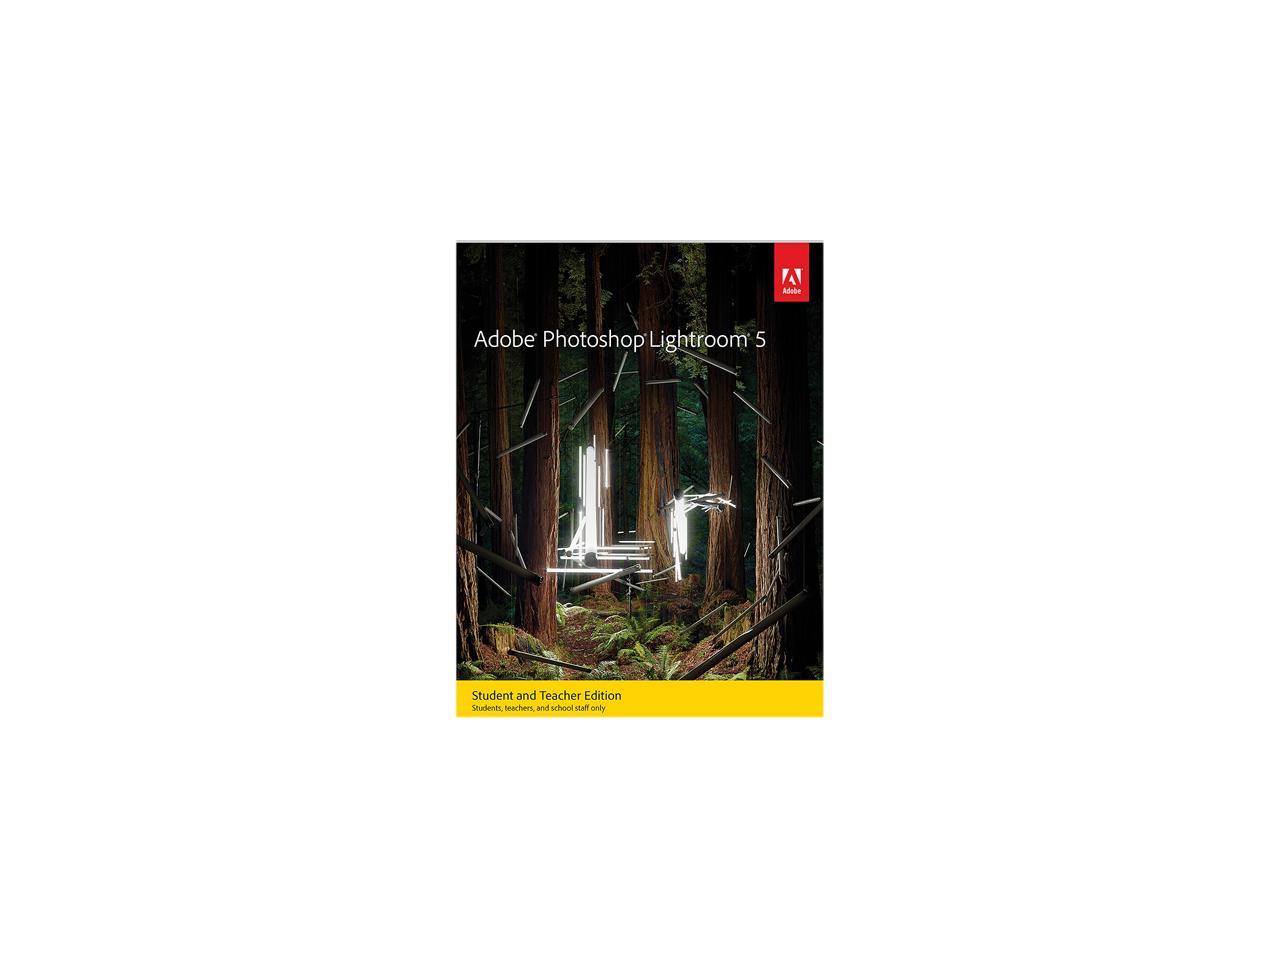 adobe photoshop lightroom 5 student and teacher edition download